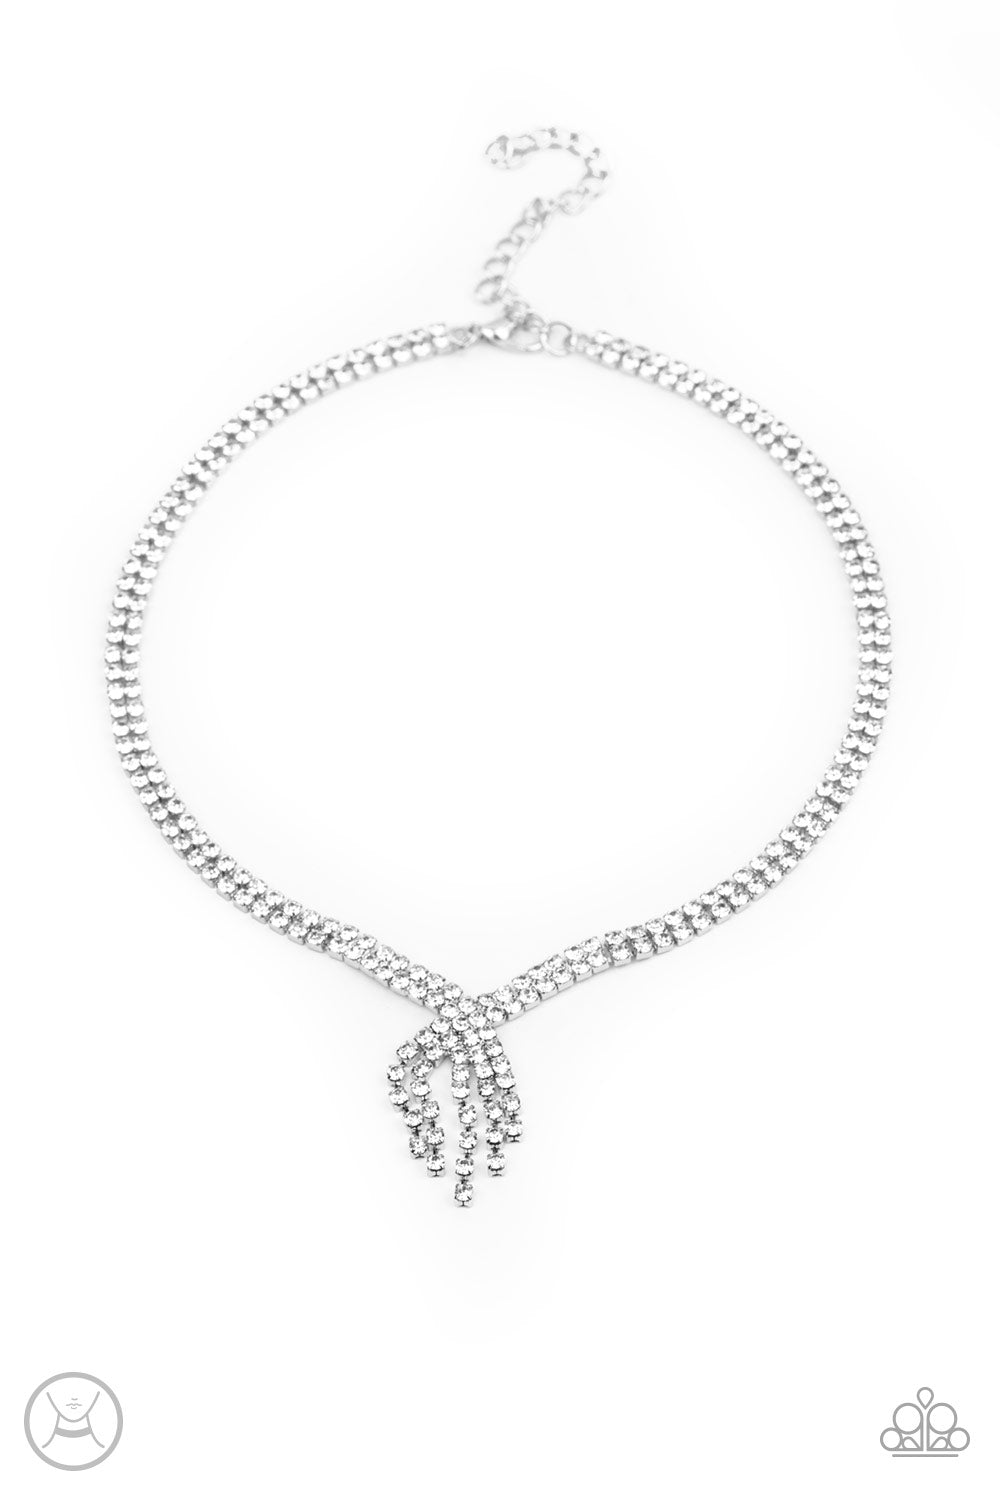 ANTE UP - SILVER CHOKER NECKLACE